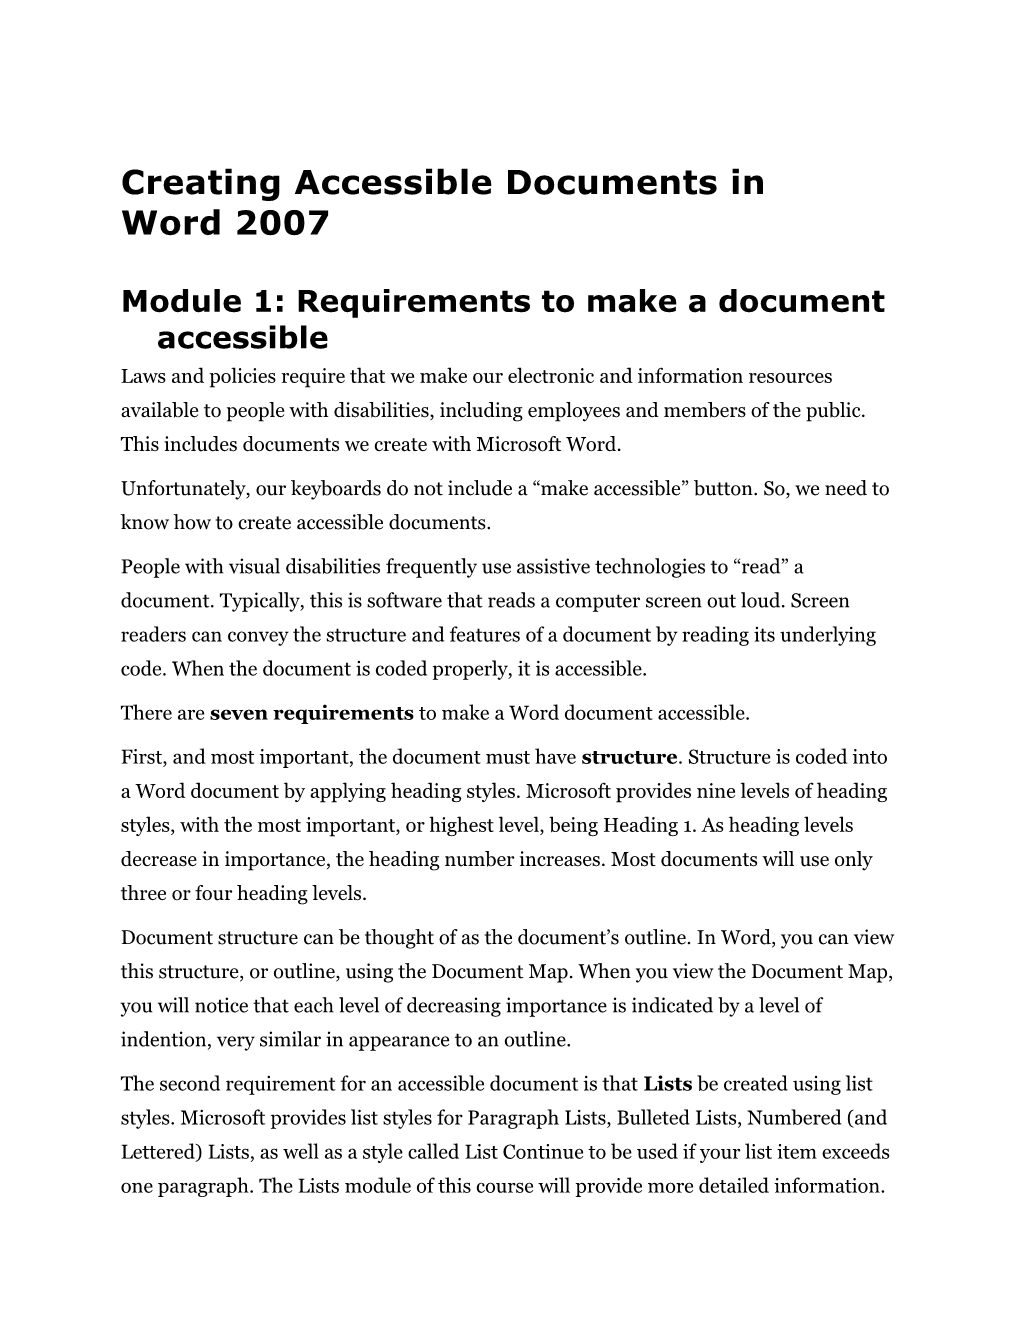 Module 1: Requirements to Make a Document Accessible